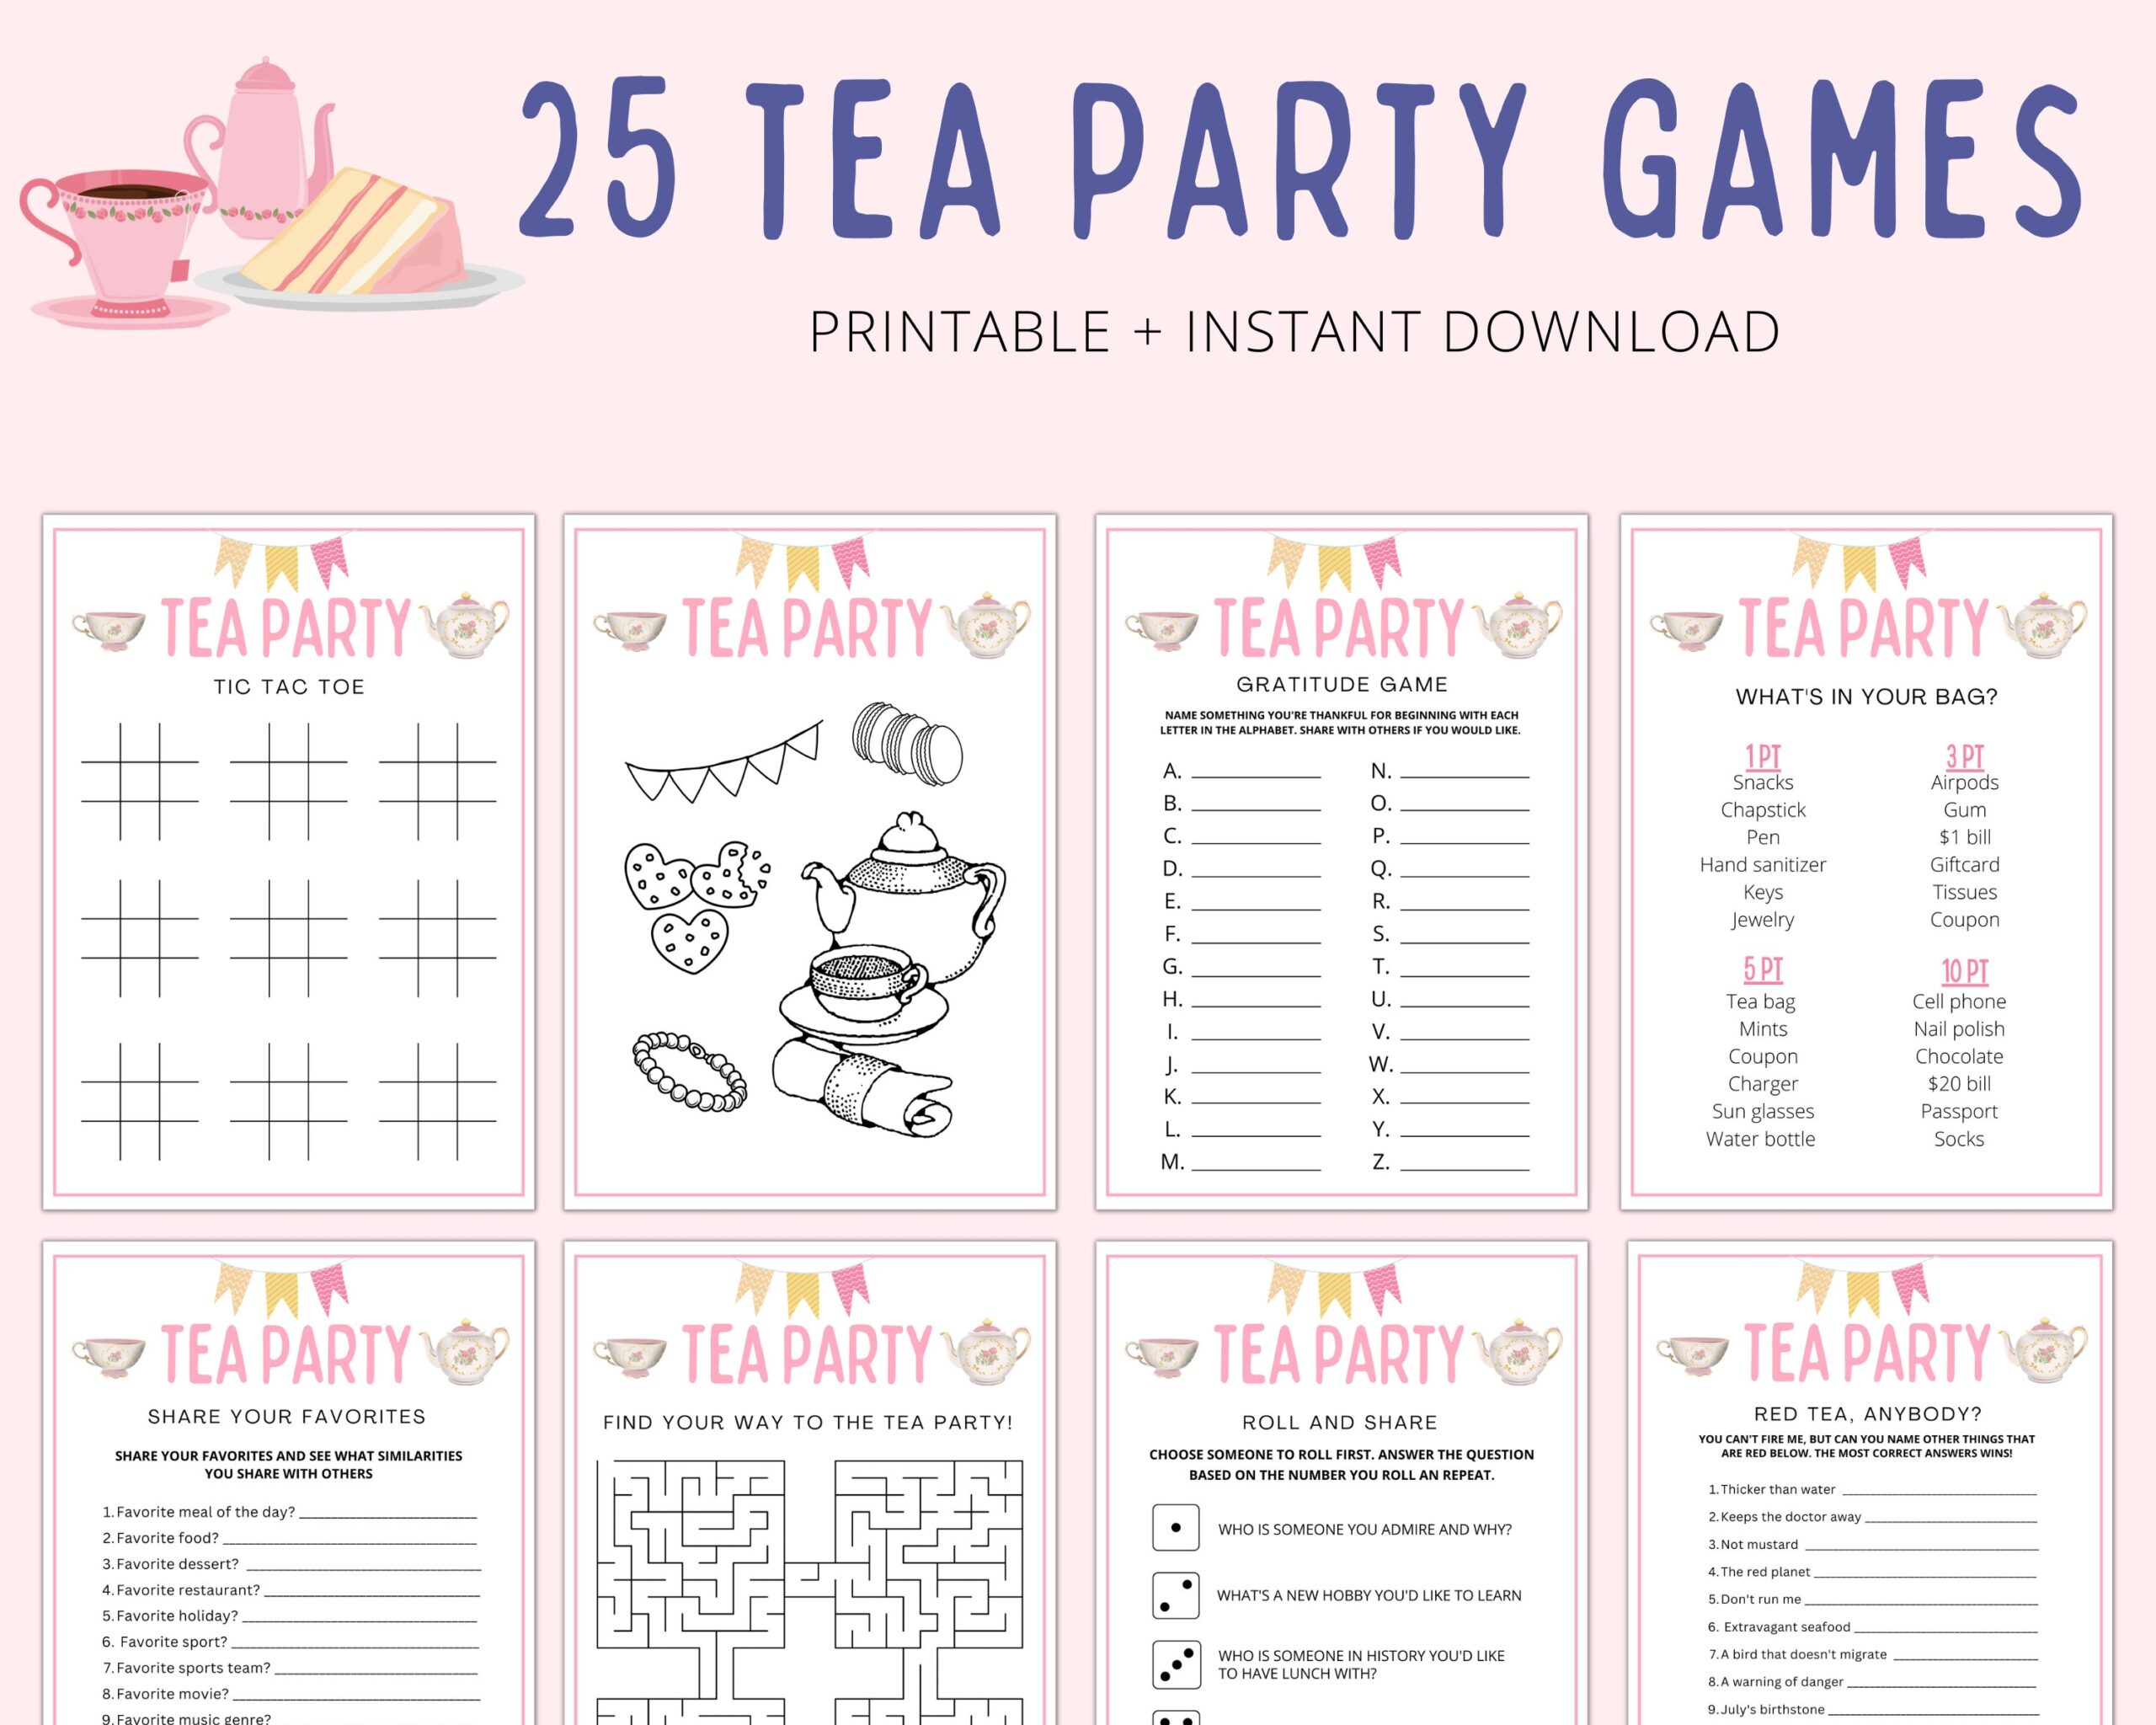 Tea Party Games Tea Party Games Adults Kids Toddler Tea Party Printable Games Tea Party Bridal Baby Shower Tea Party Birthday Etsy